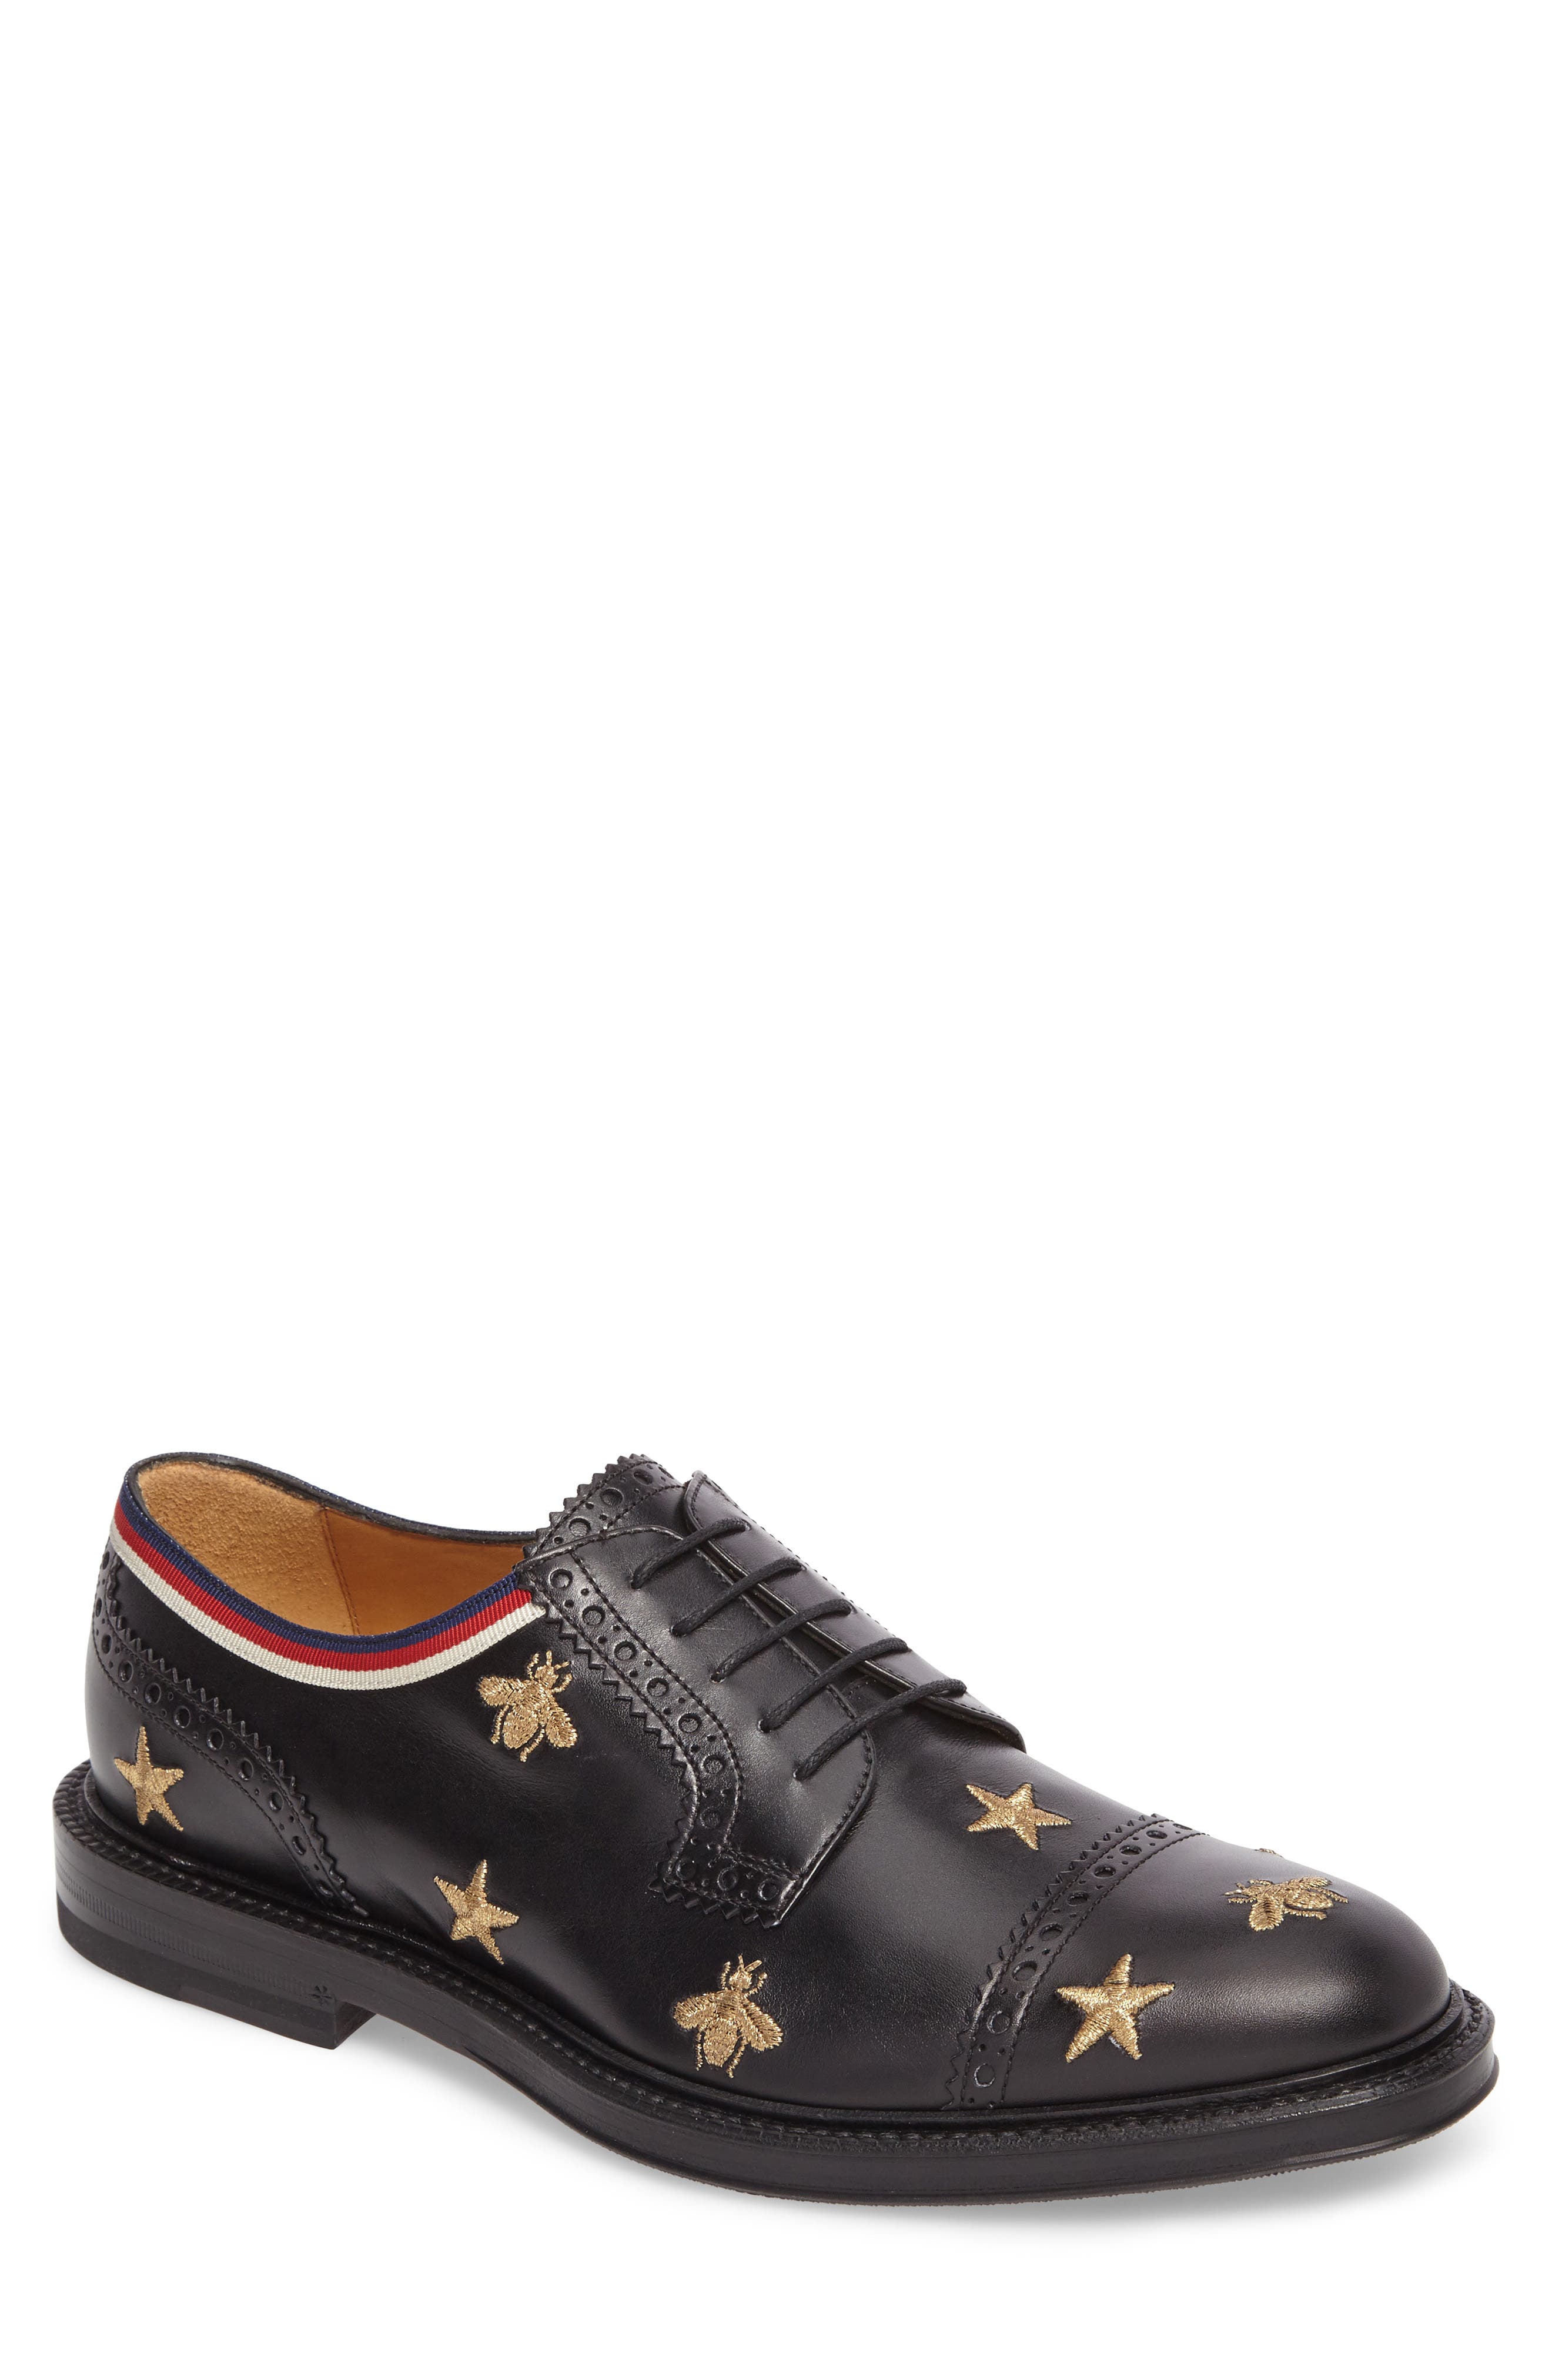 Gucci Embroidered Leather Brogue Shoe 